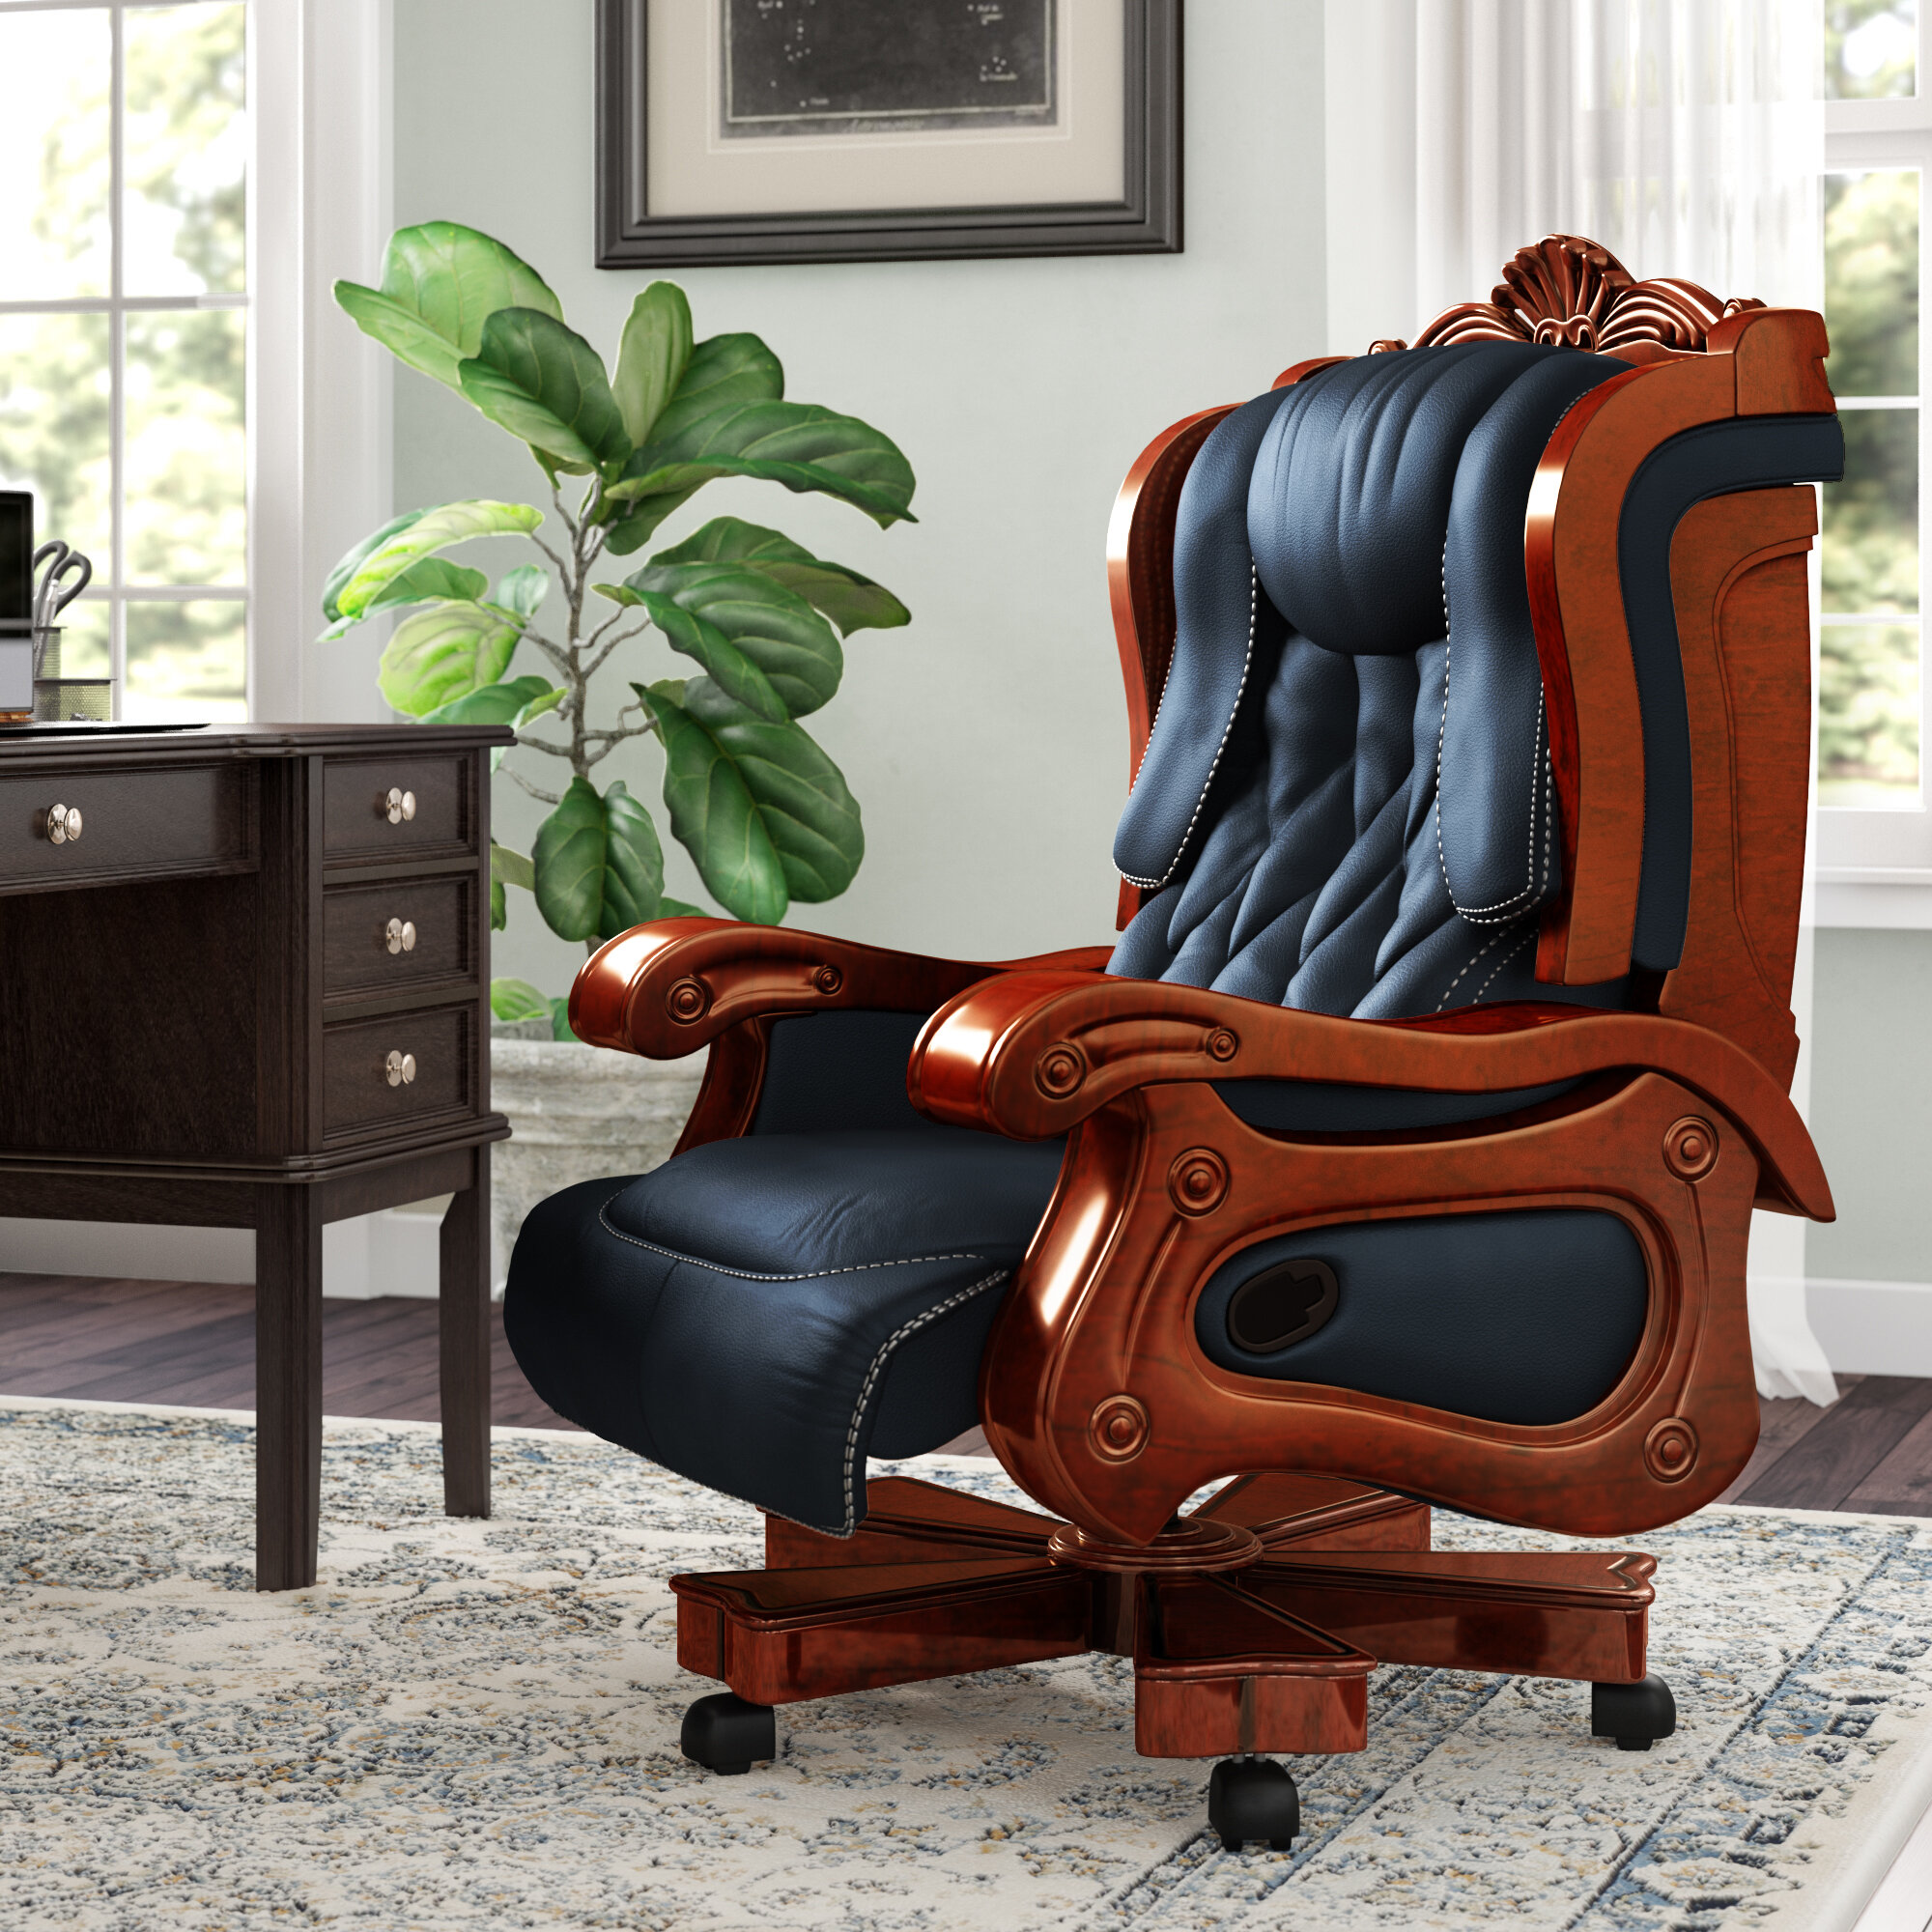 Pennexecutivechairs Timko Genuine Leather Executive Chair Reviews Wayfair